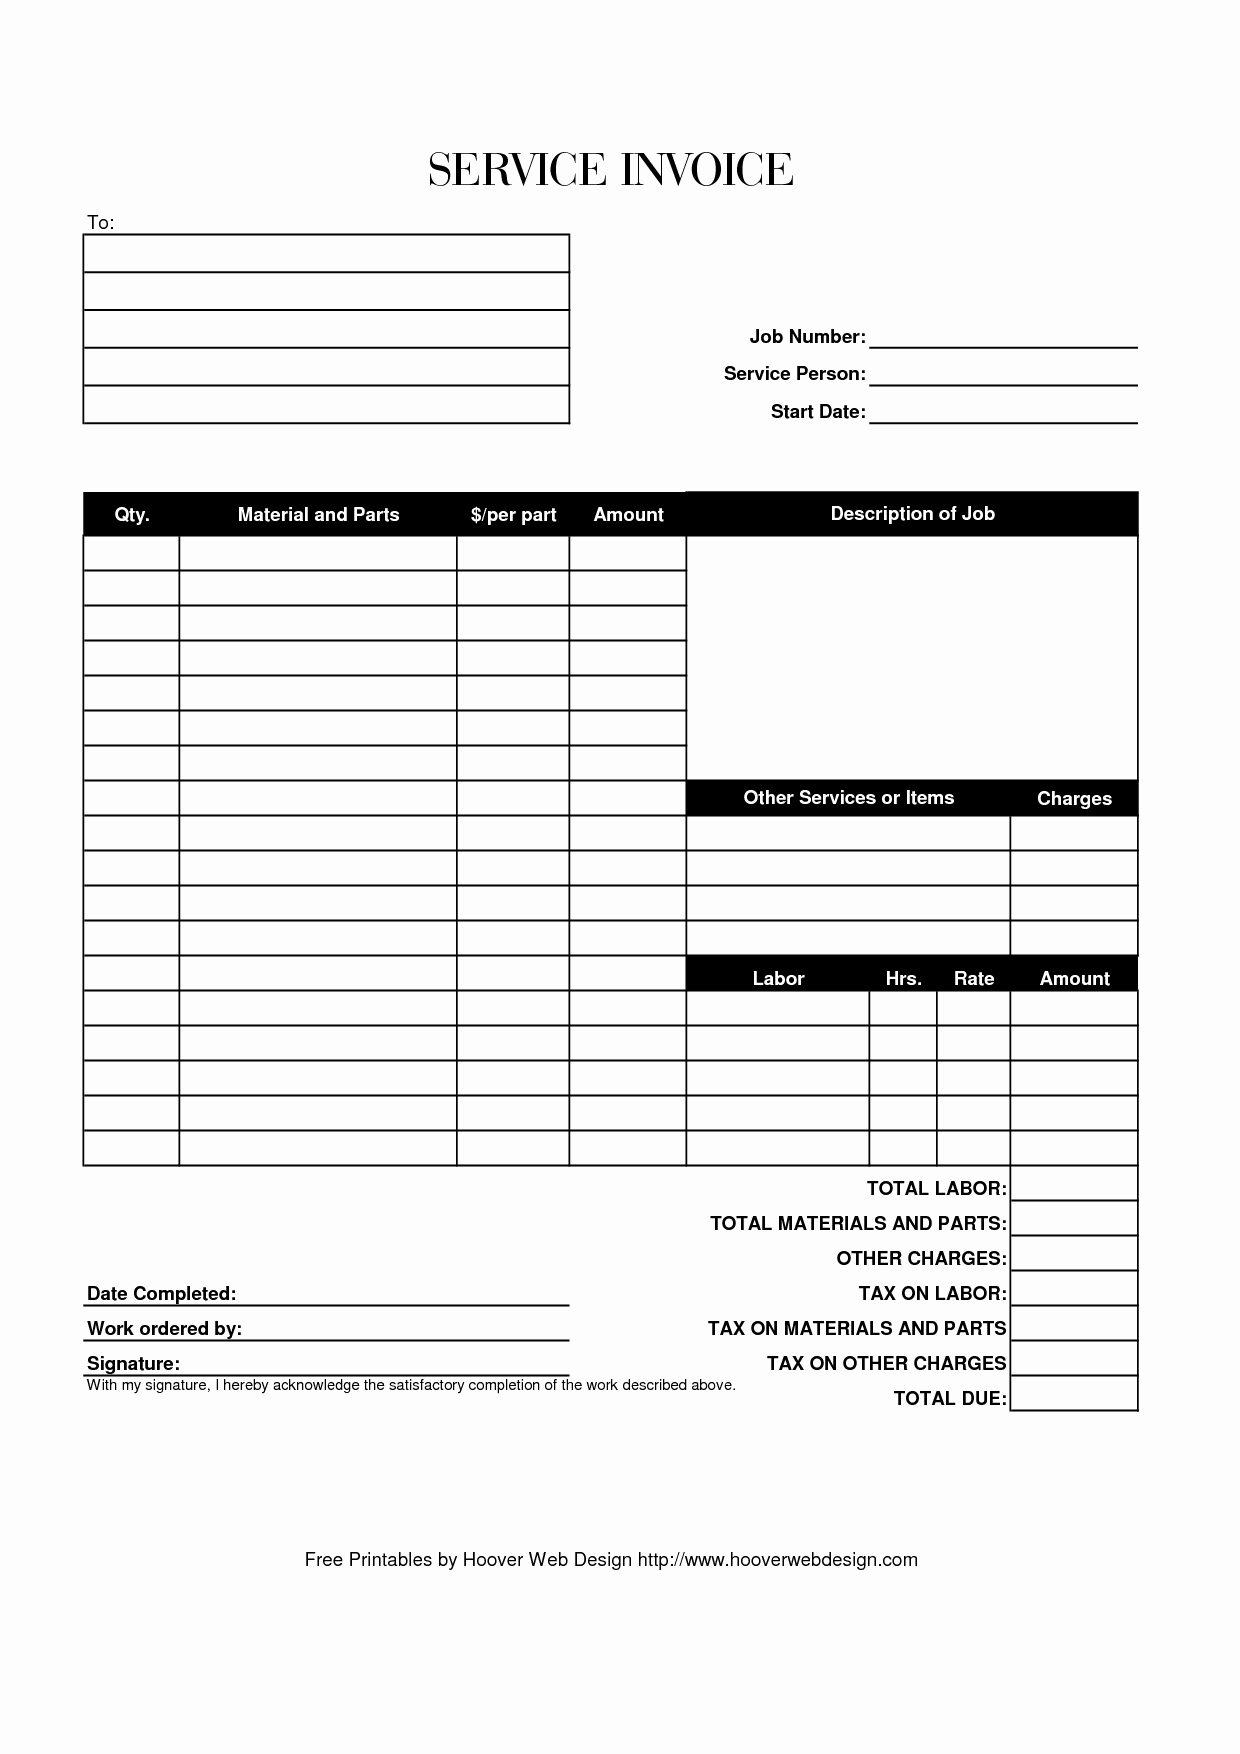 Invoice for Work Done Template Fresh Work Invoice Template Pdf